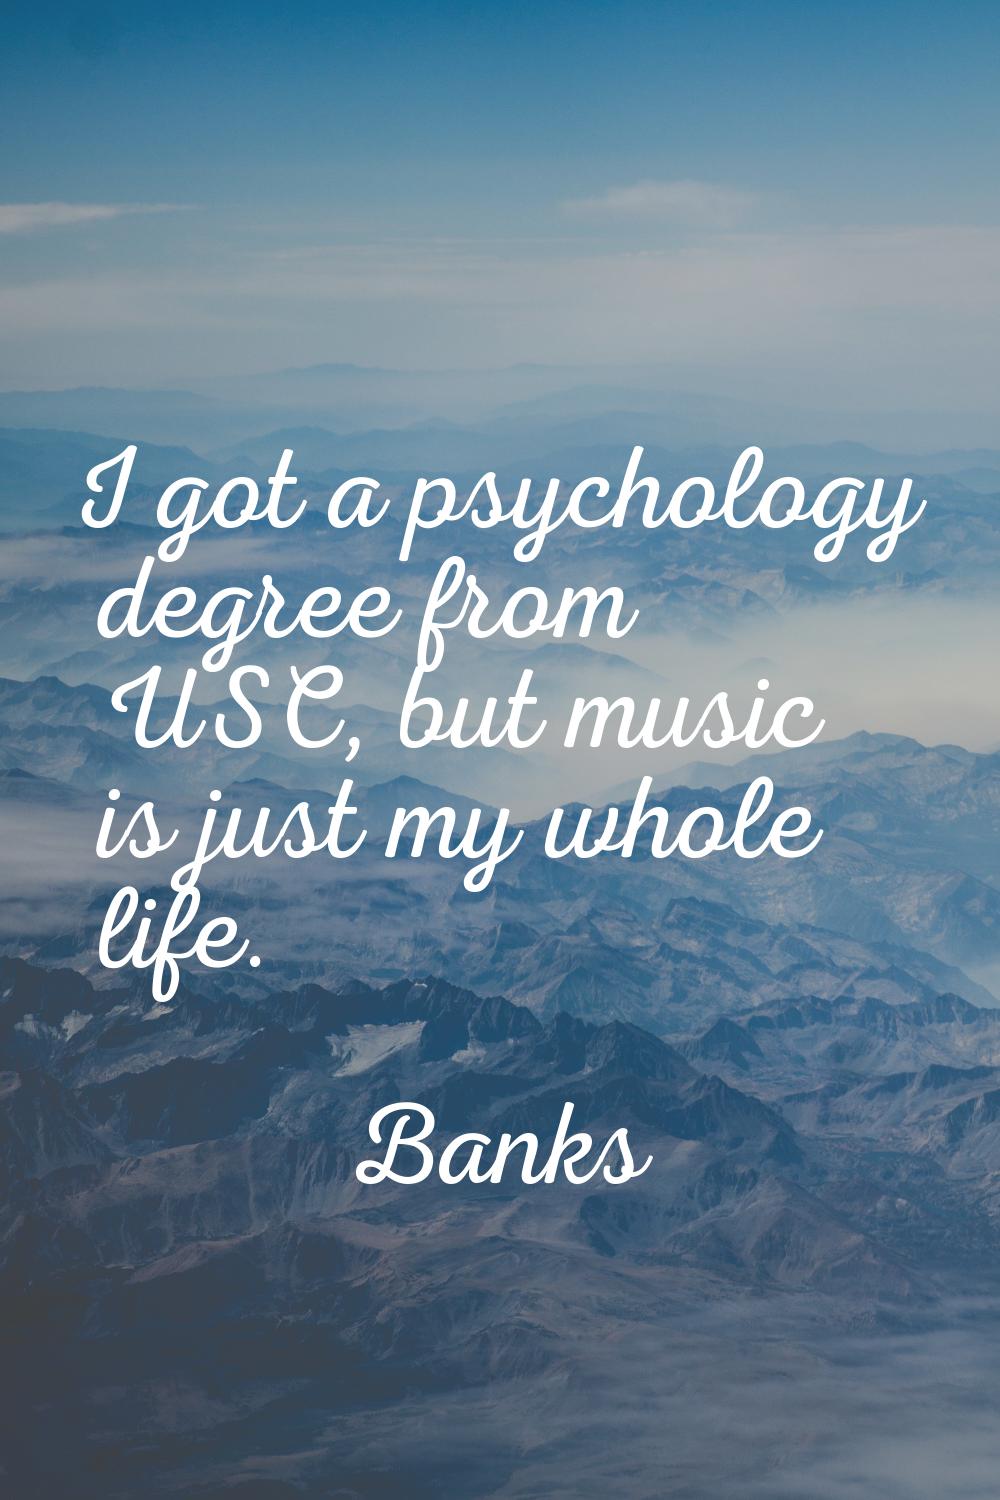 I got a psychology degree from USC, but music is just my whole life.